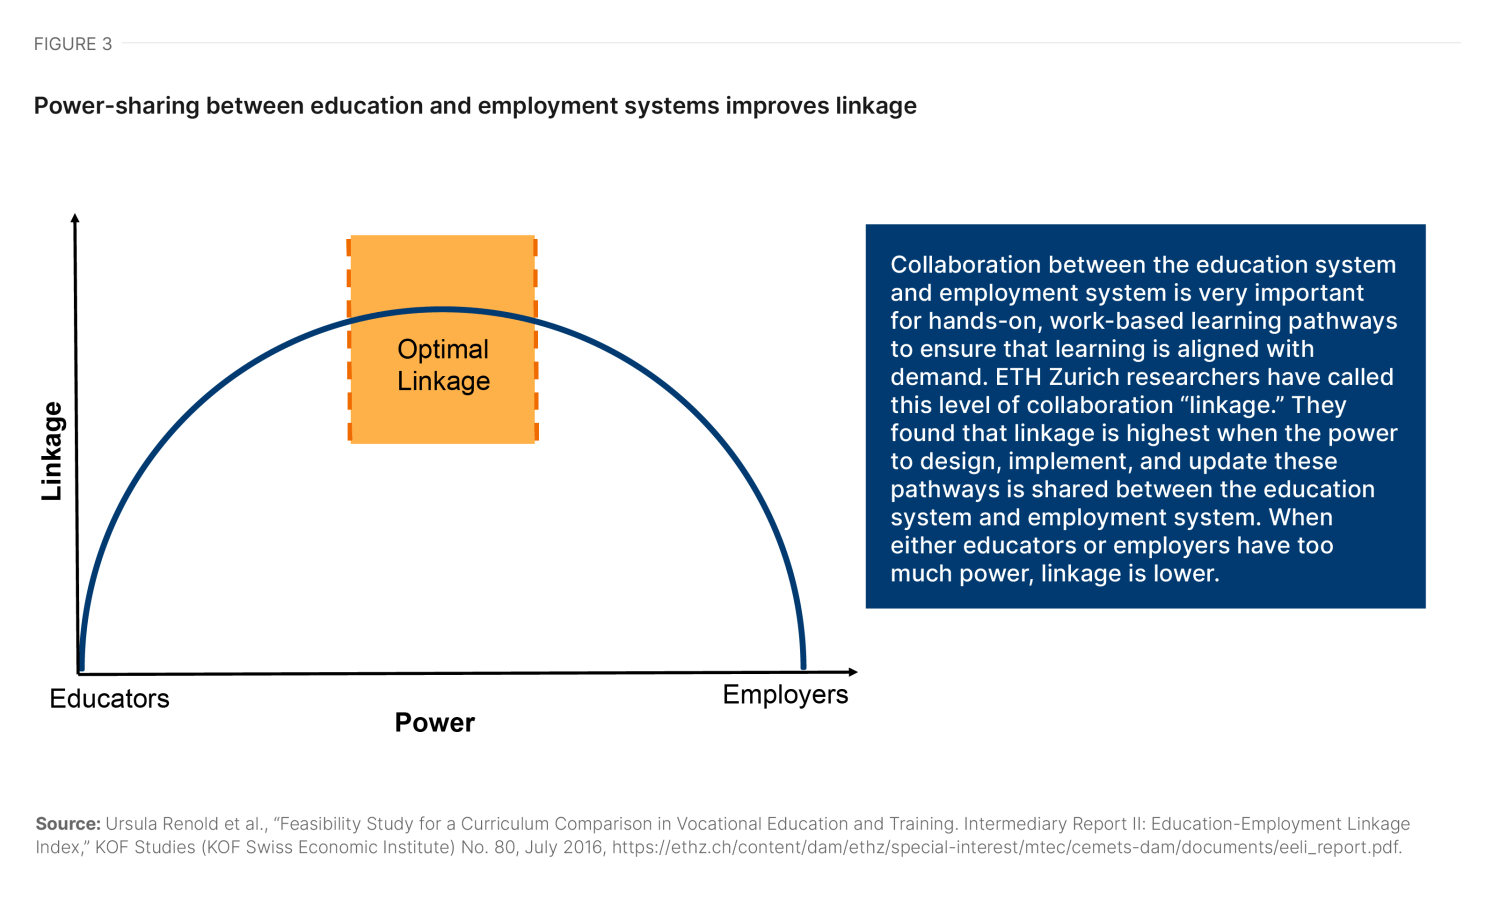 Figure 3. Power sharing between education and employment systems improves linkage